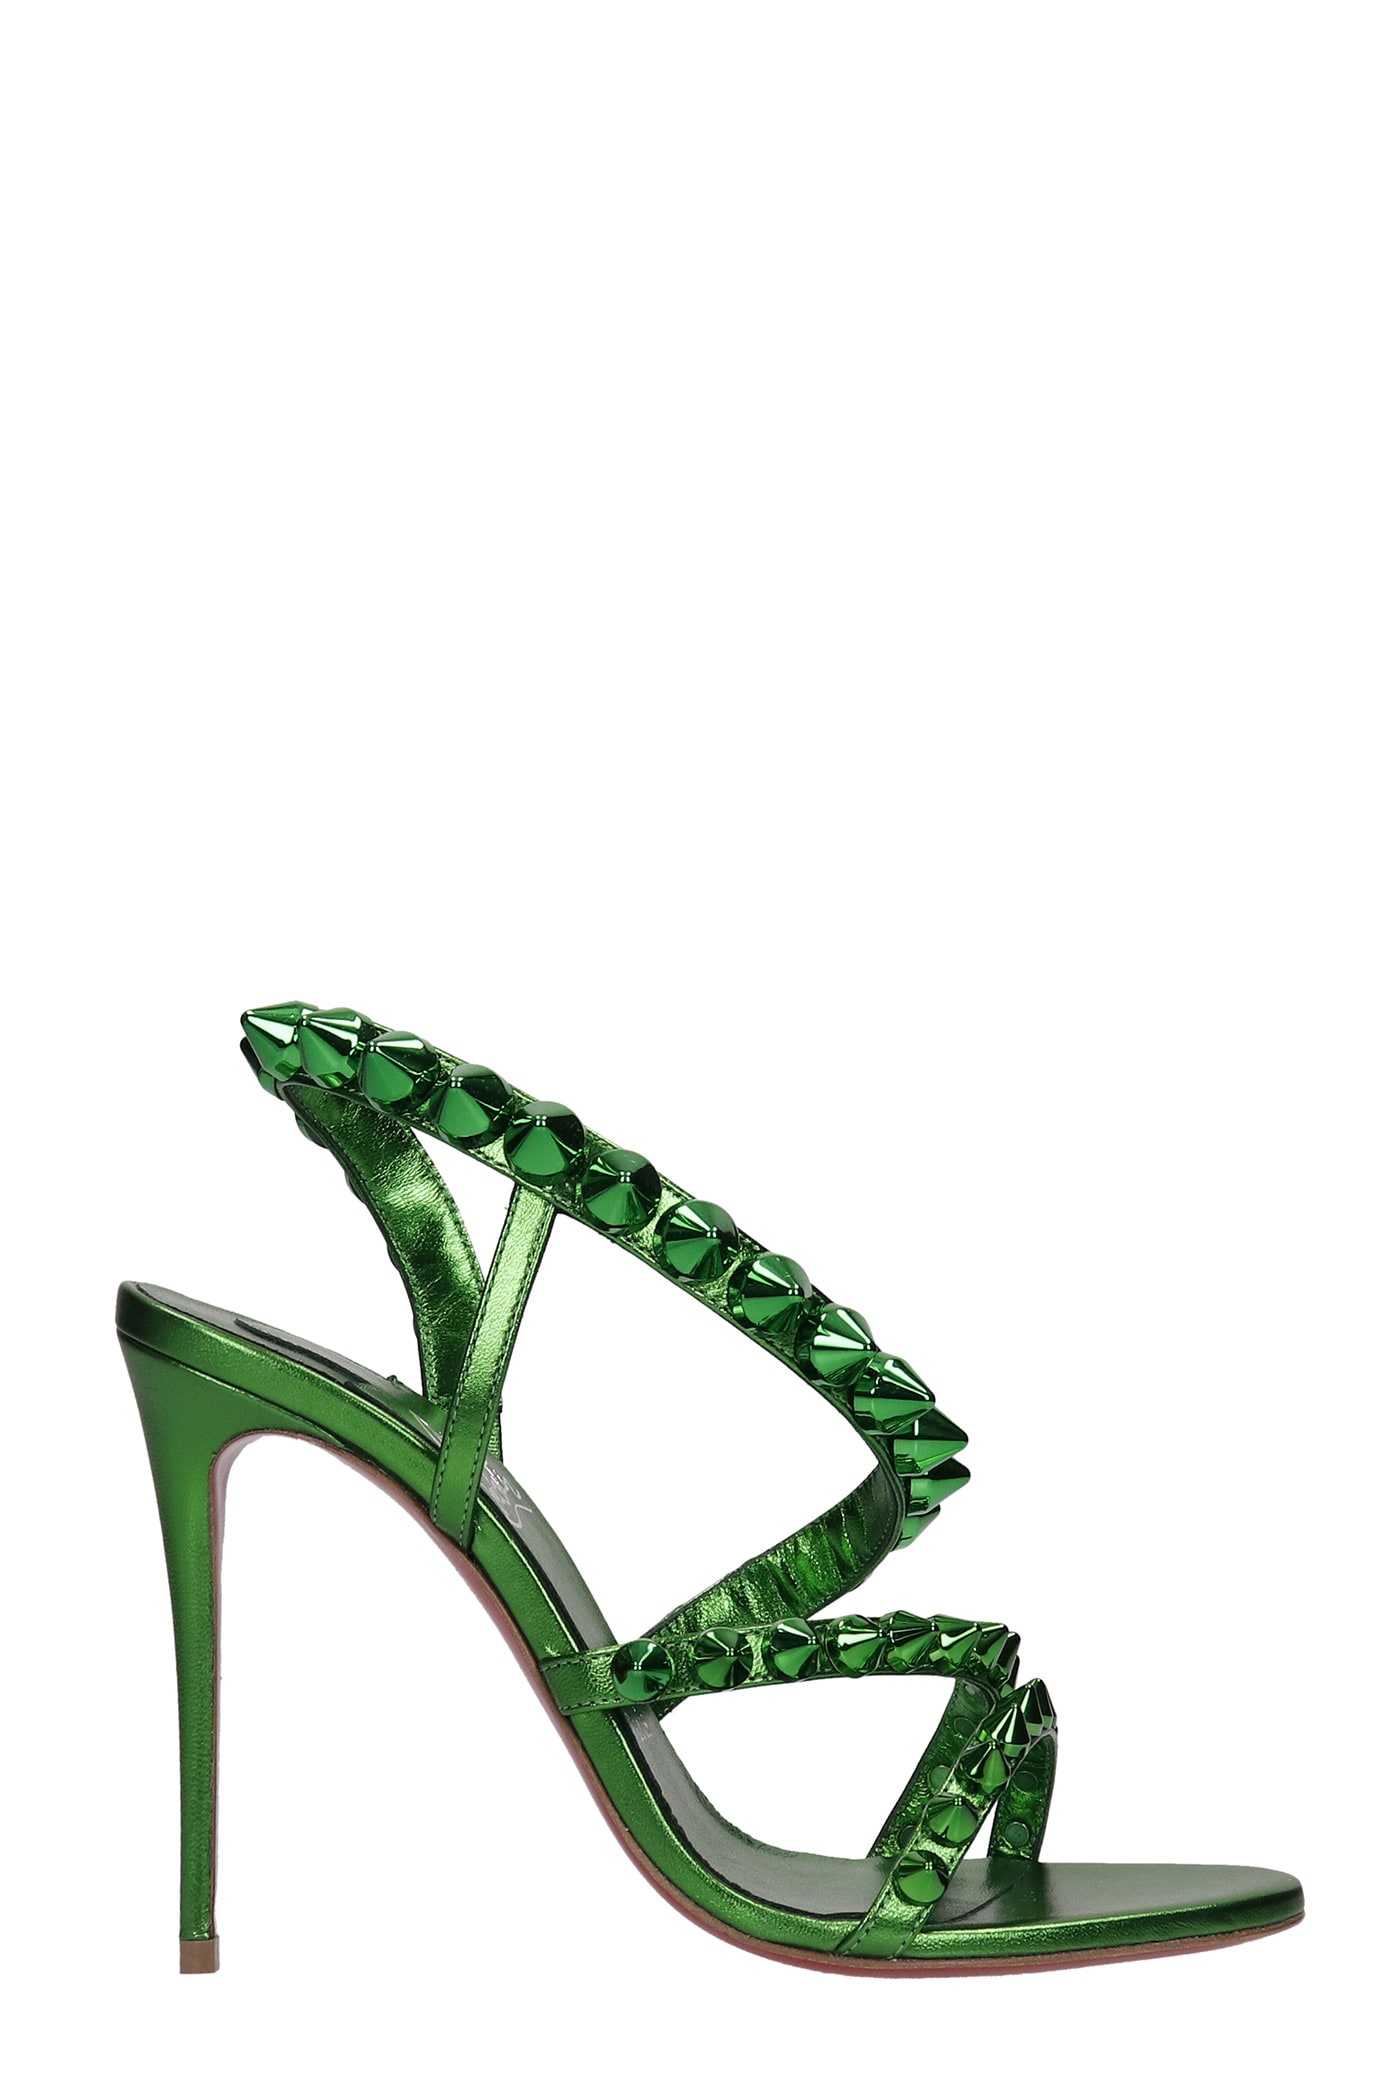 Christian Louboutin Spikita Strap Sandals In Green Leather